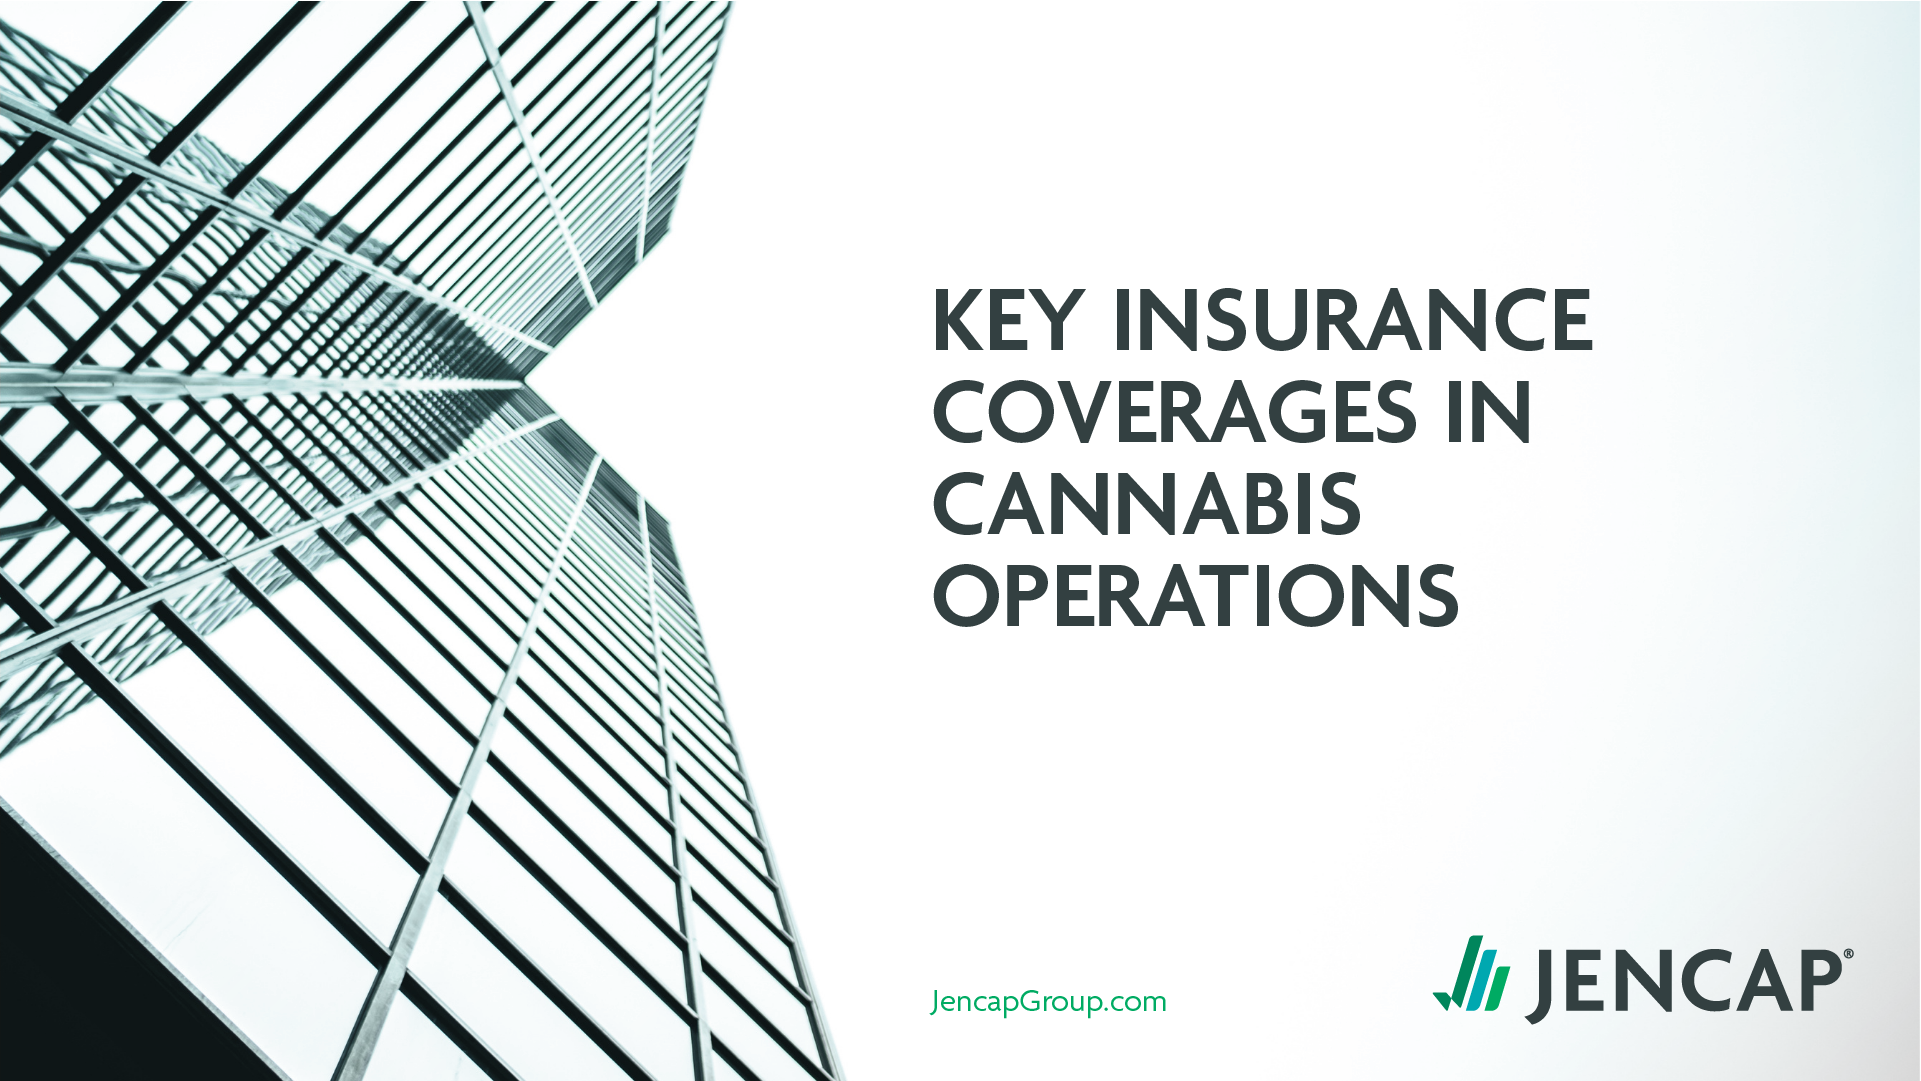 Key Insurance Coverages in Cannabis Operations